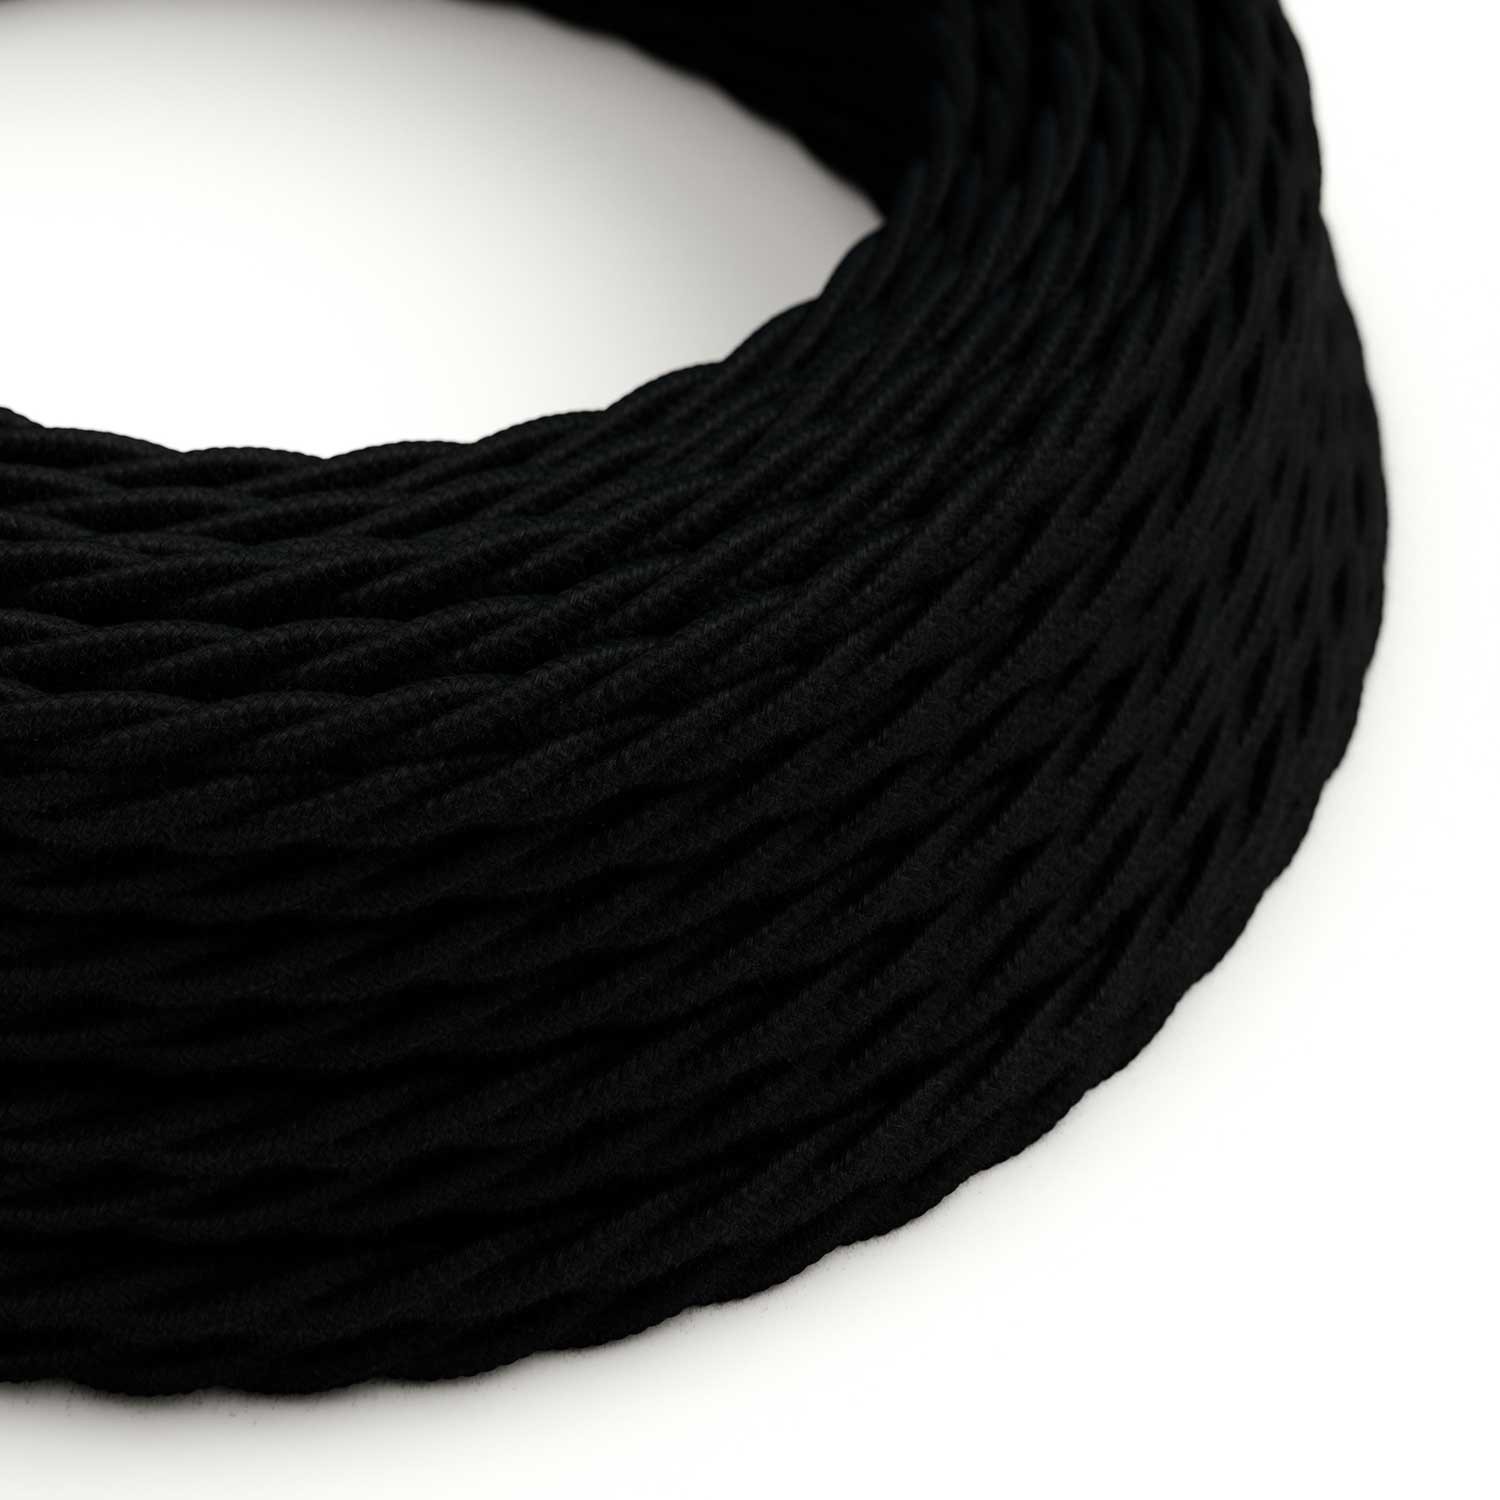 Twisted Electric Cable covered by Cotton solid colour fabric TC04 Black